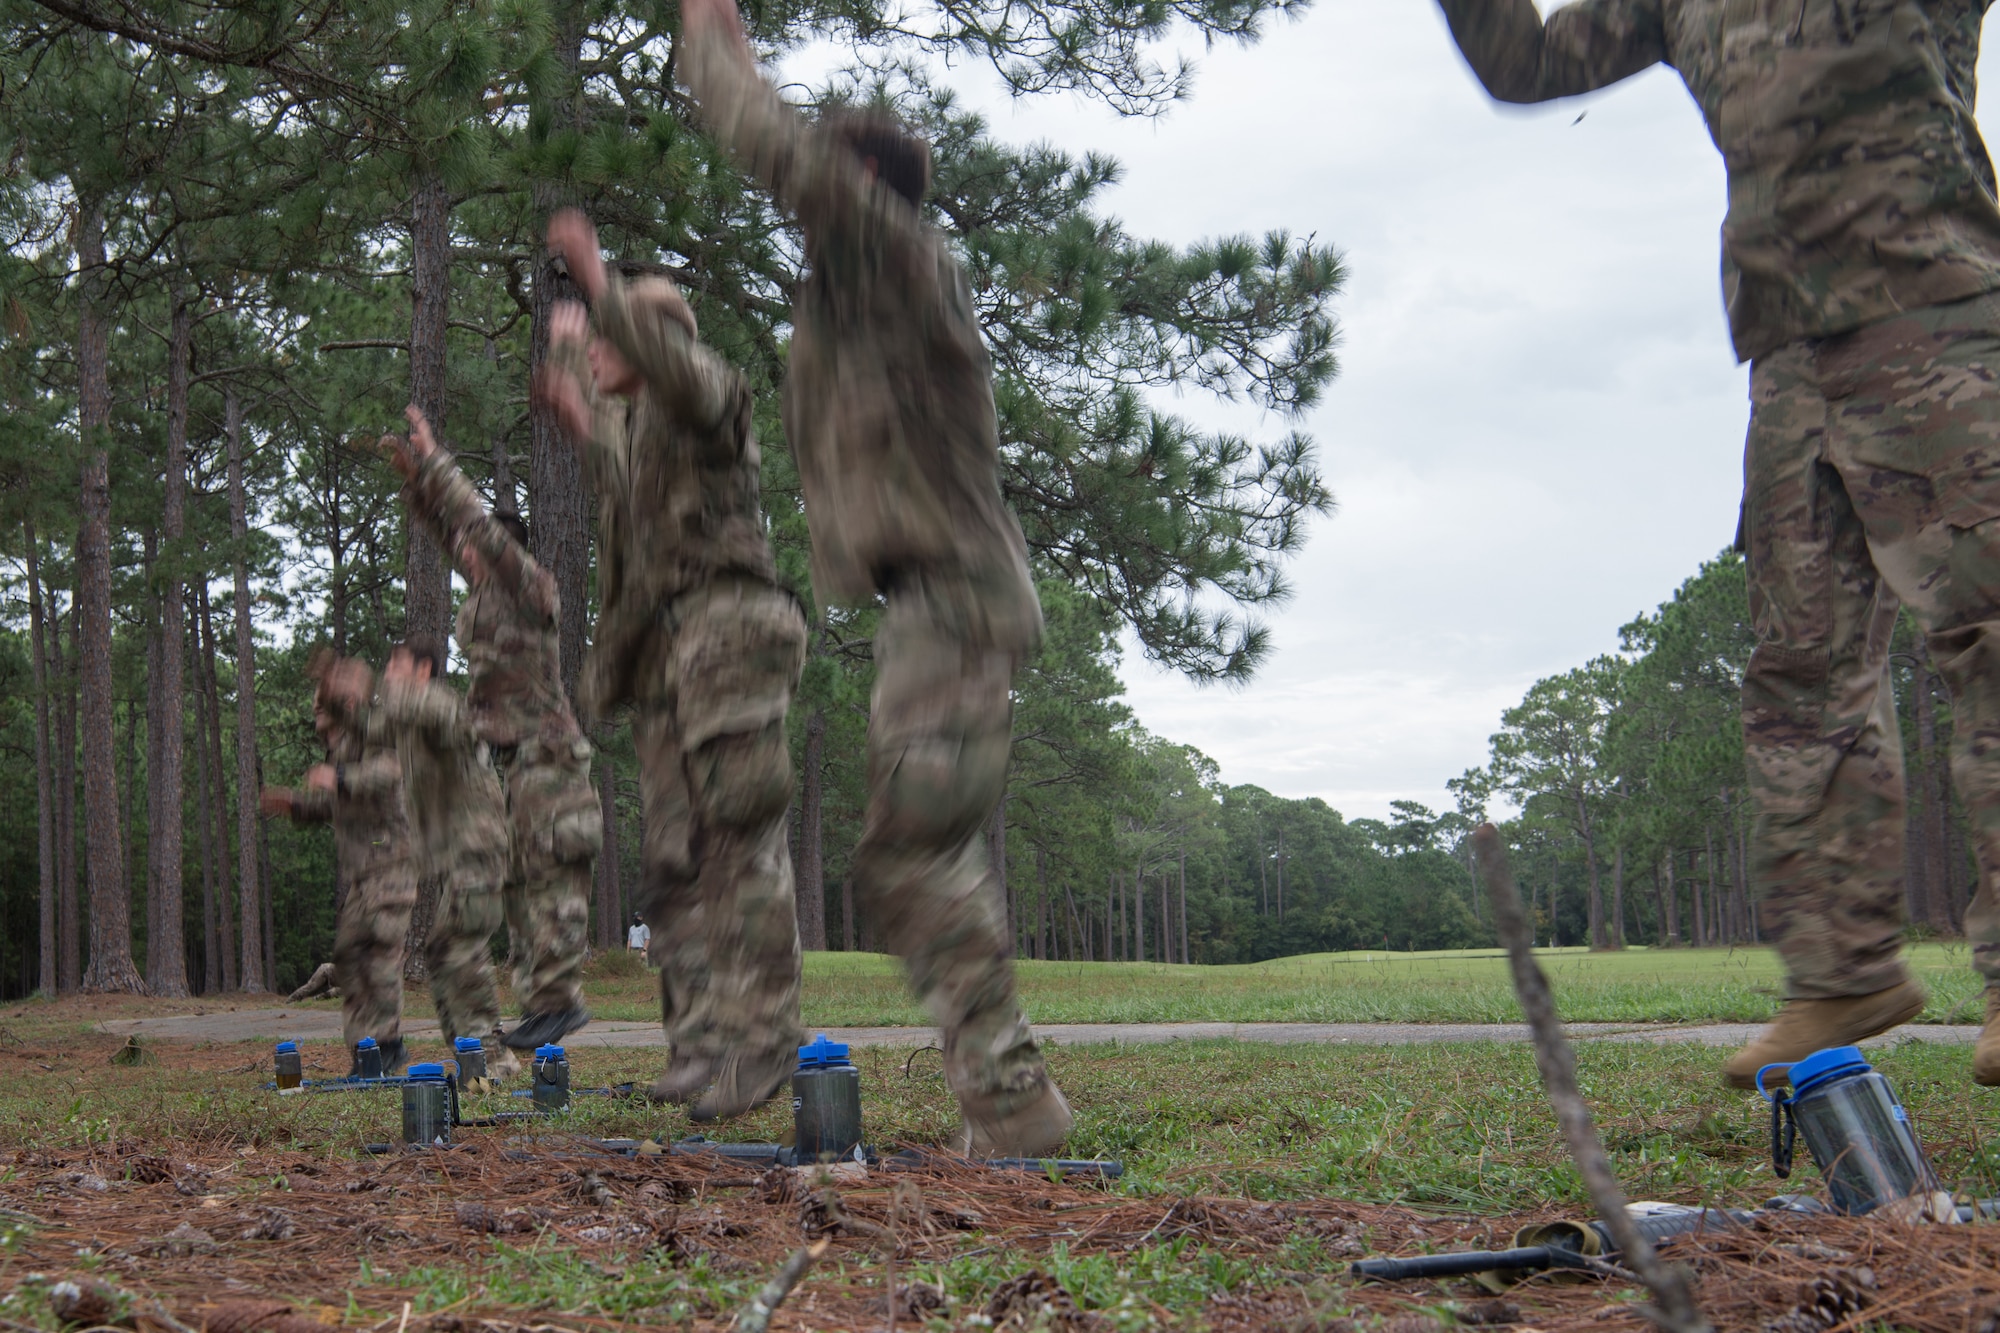 Special Tactics tactical air control party candidates all jump into the air with their hands above their heads all at the same time while in a line.